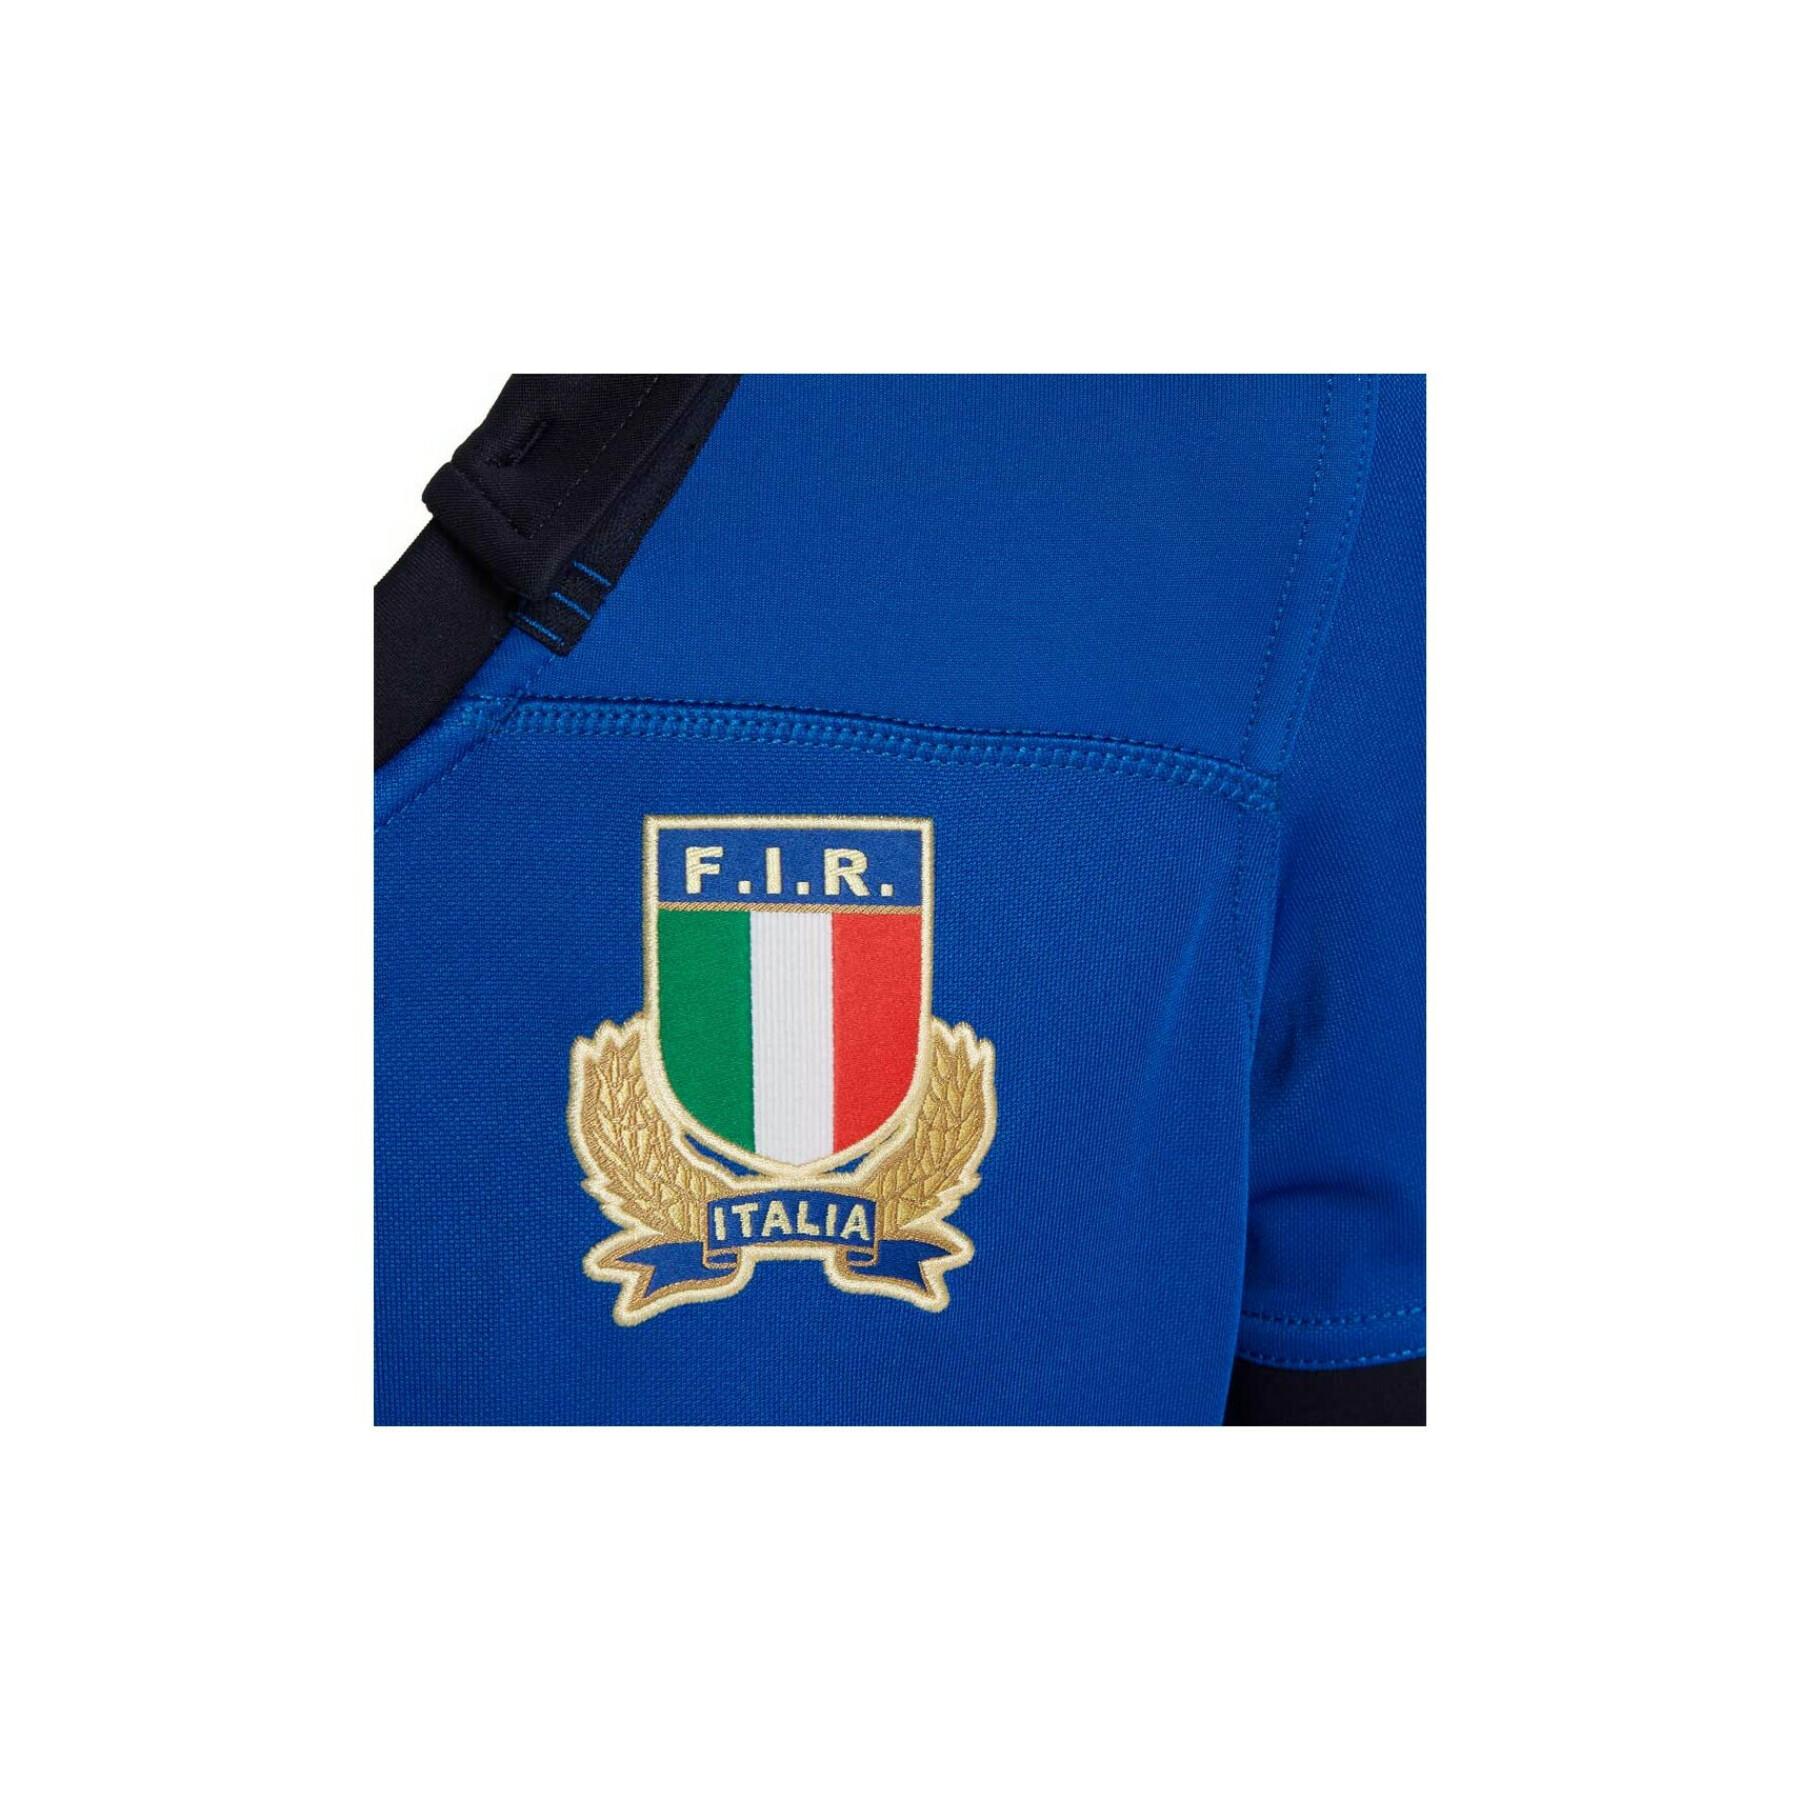 World Cup home jersey for kids Italie rugby 2019